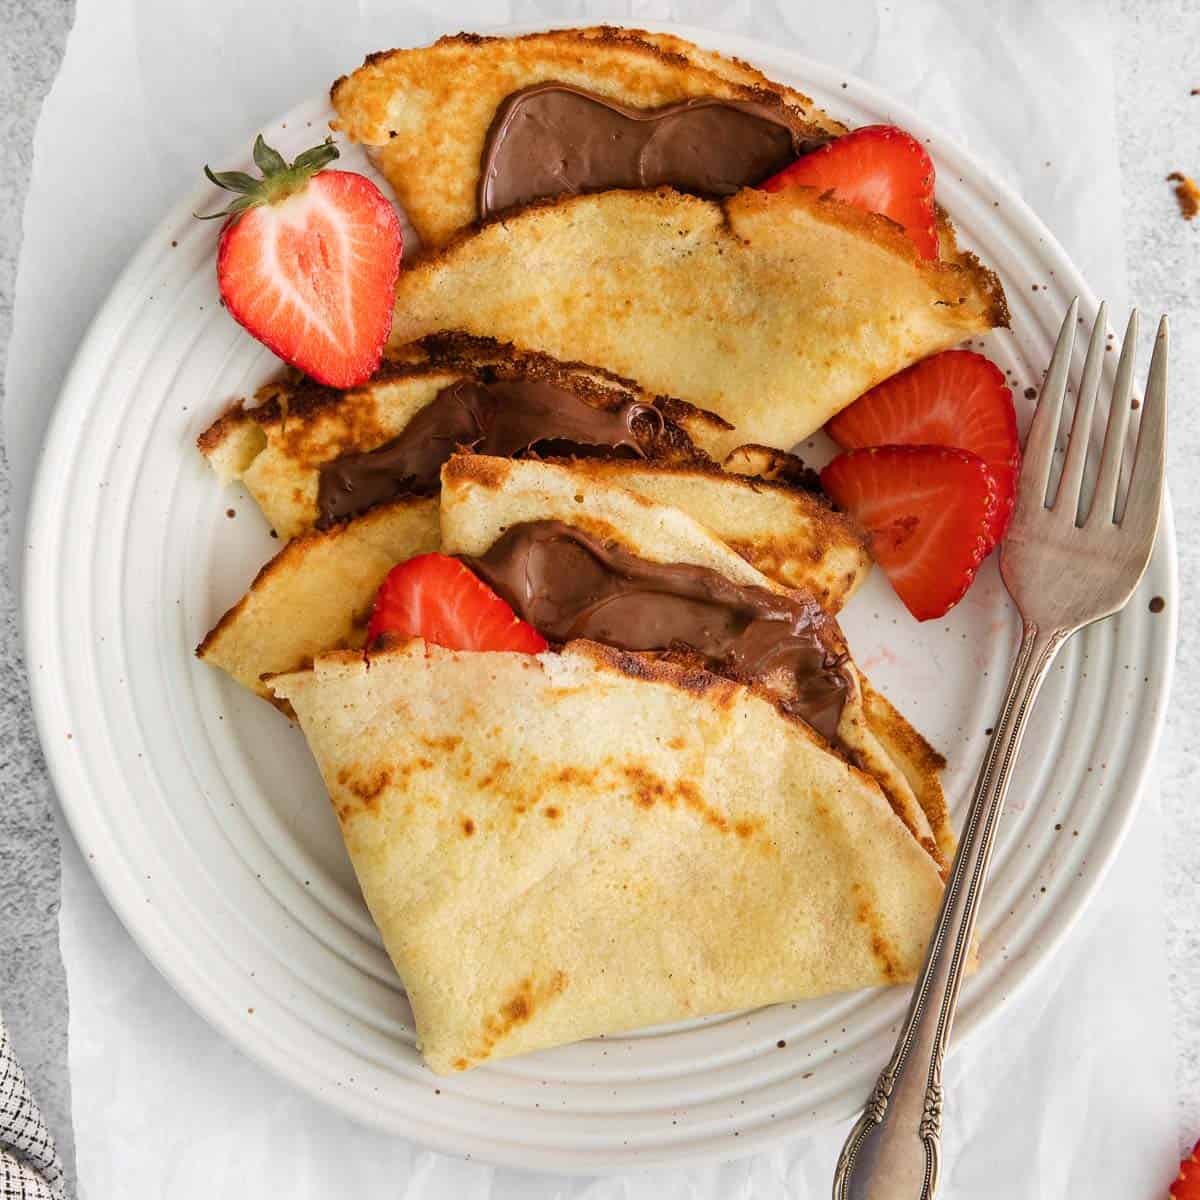 https://meaningfuleats.com/wp-content/uploads/2022/07/gluten-free-crepes-3.jpg